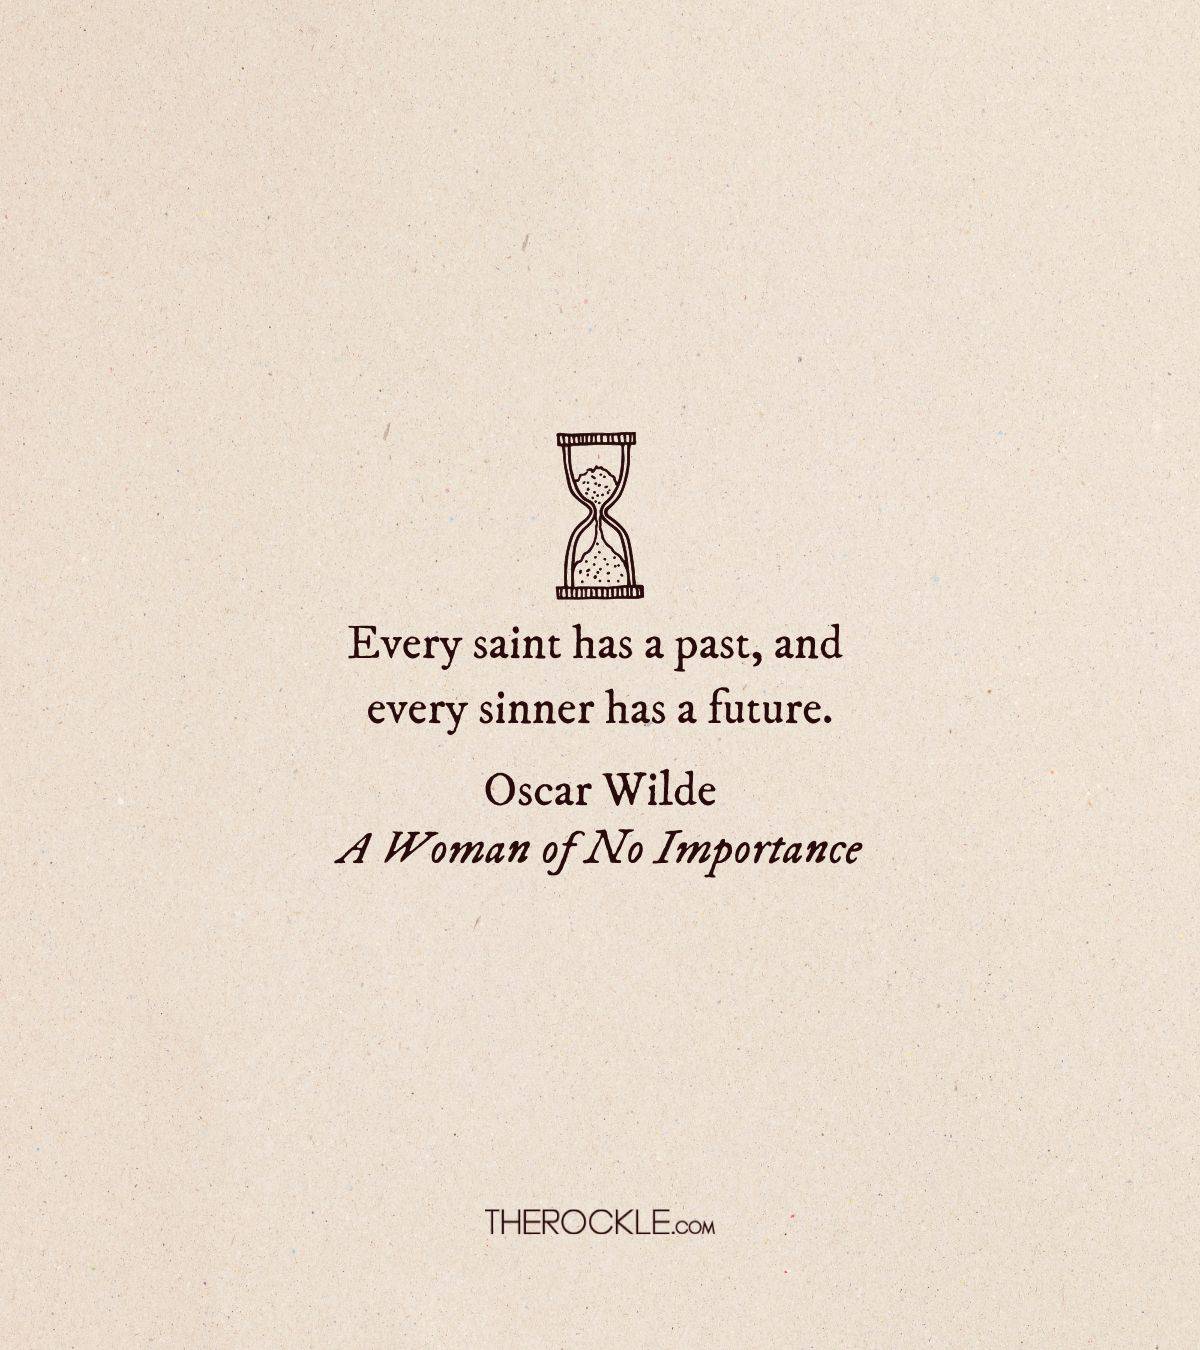 Oscar Wilde quote about redemption